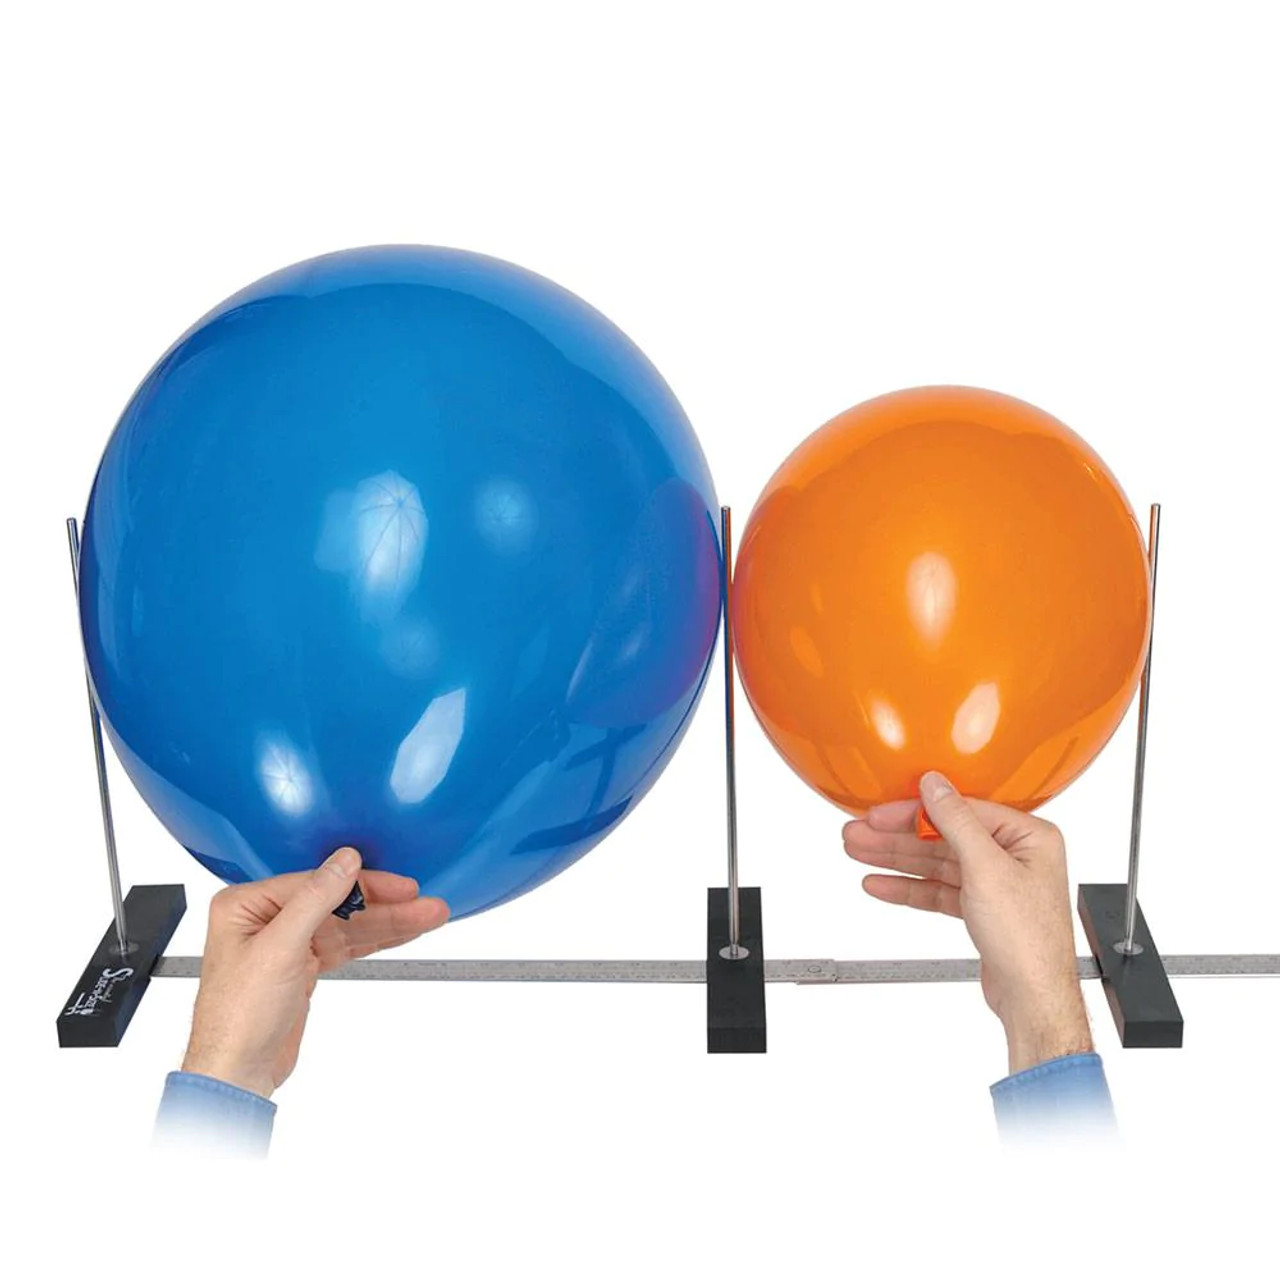 How to correctly inflate Qualatex Geo Blossom Balloons 